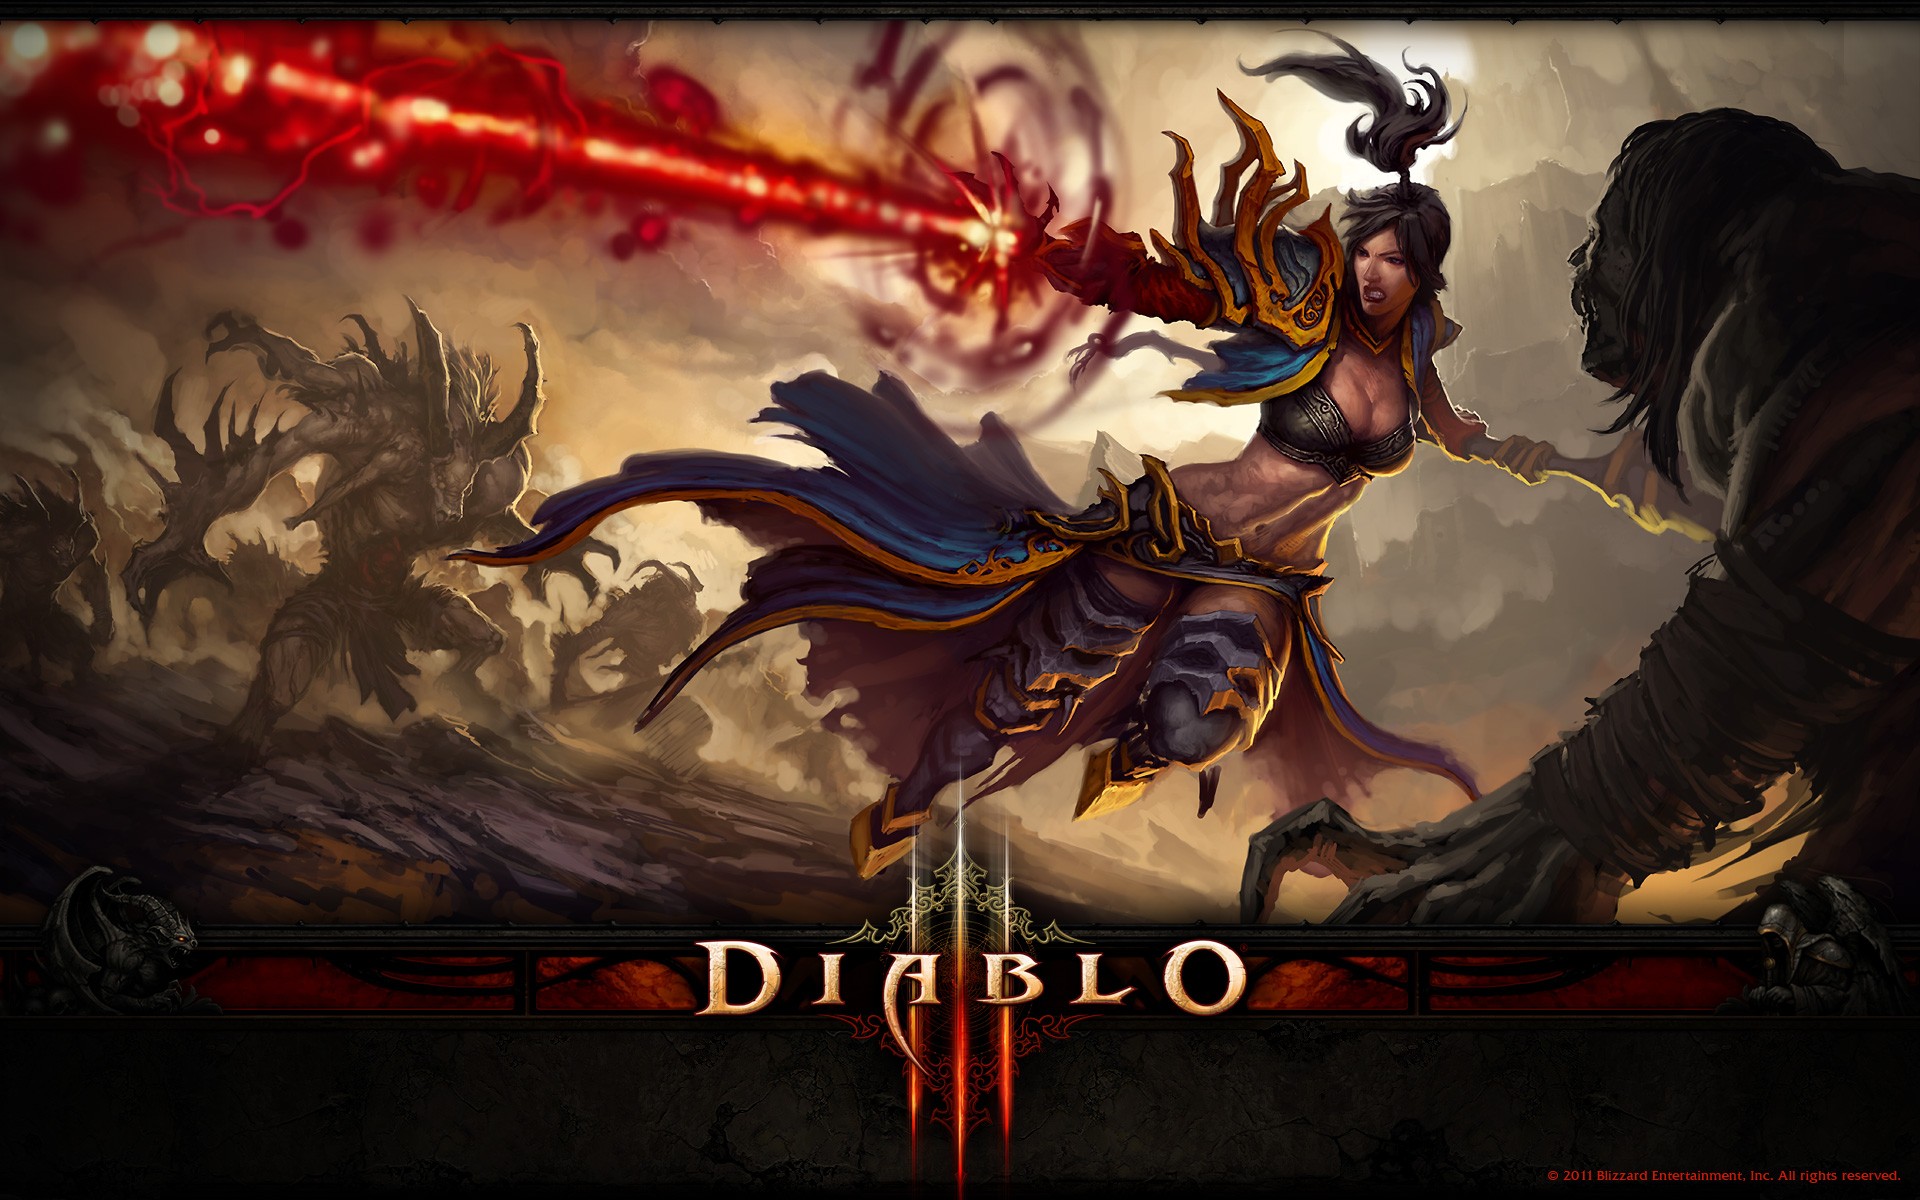 General 1920x1200 Diablo III video games video game art fantasy girl PC gaming boobs cleavage video game girls Blizzard Entertainment 2011 (Year)